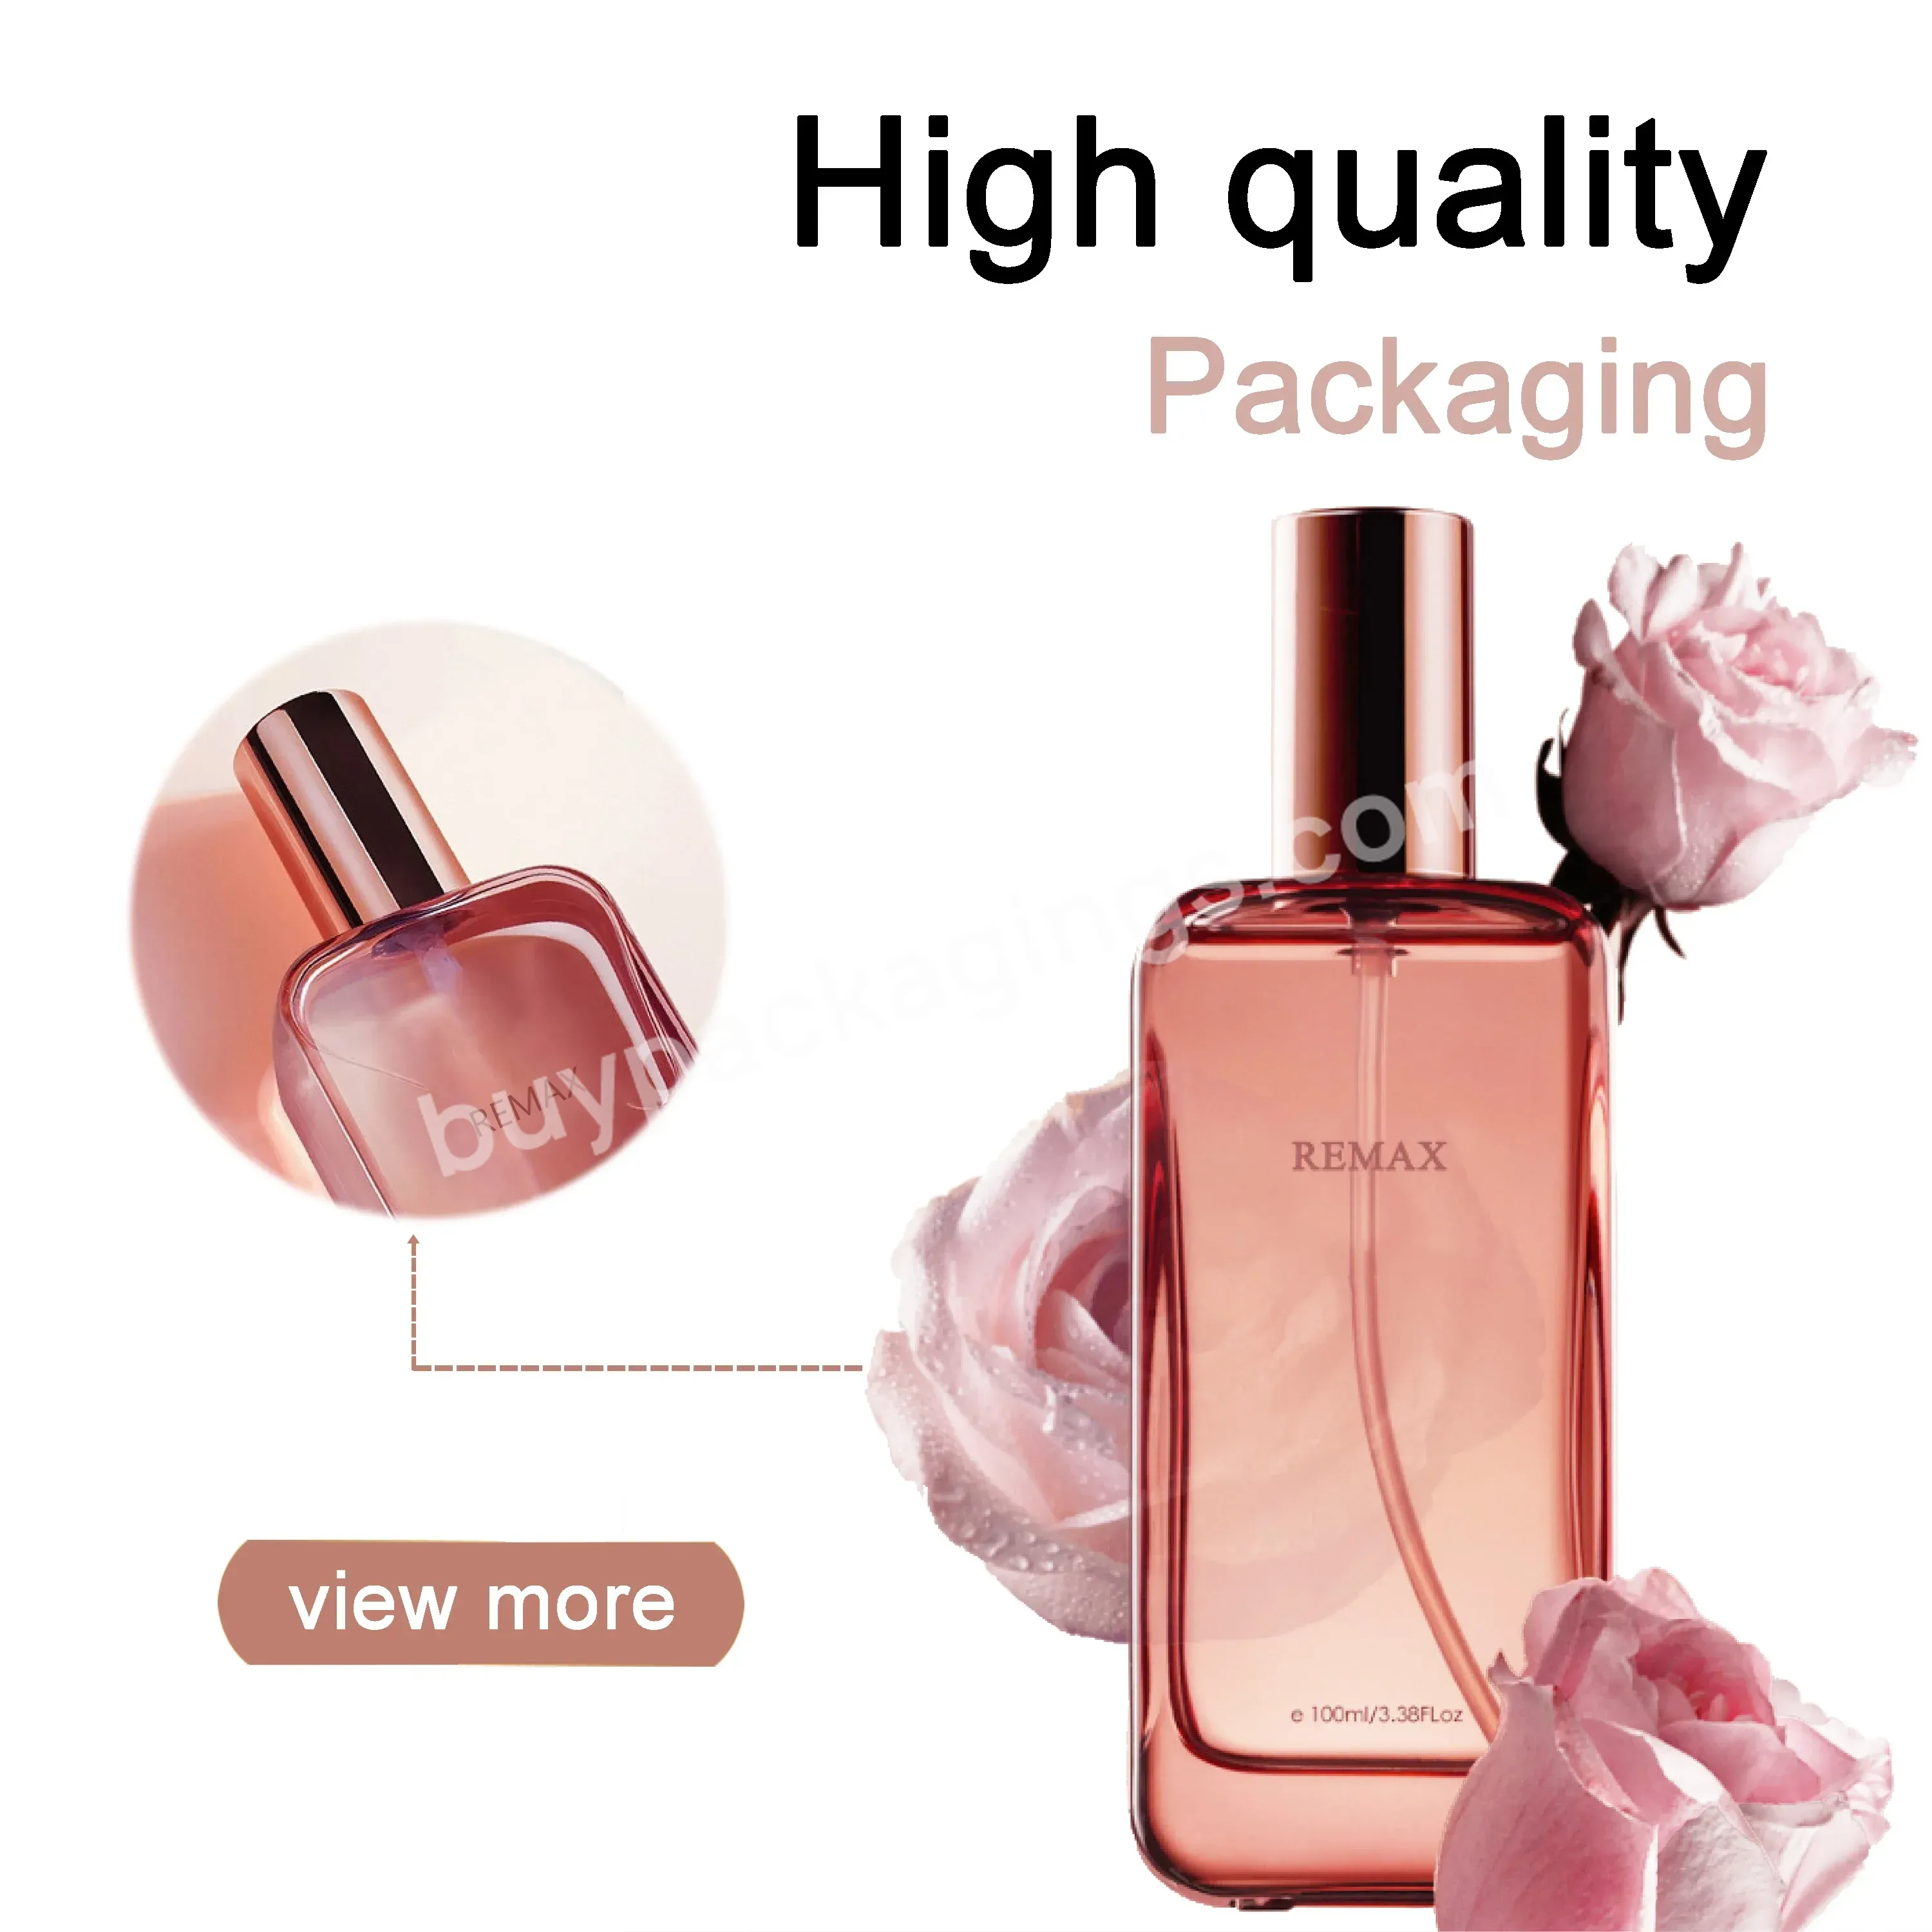 Stylish 100ml/3.38oz Pink Hair Nourishment Oil Container Glass Bottle Lotion Bottle For Packaging - Buy 100ml Pink Hair Nourishment Bottle,Stylish 100ml/3.38oz Packaging Bottle,Lotion Bottle For Packaging.